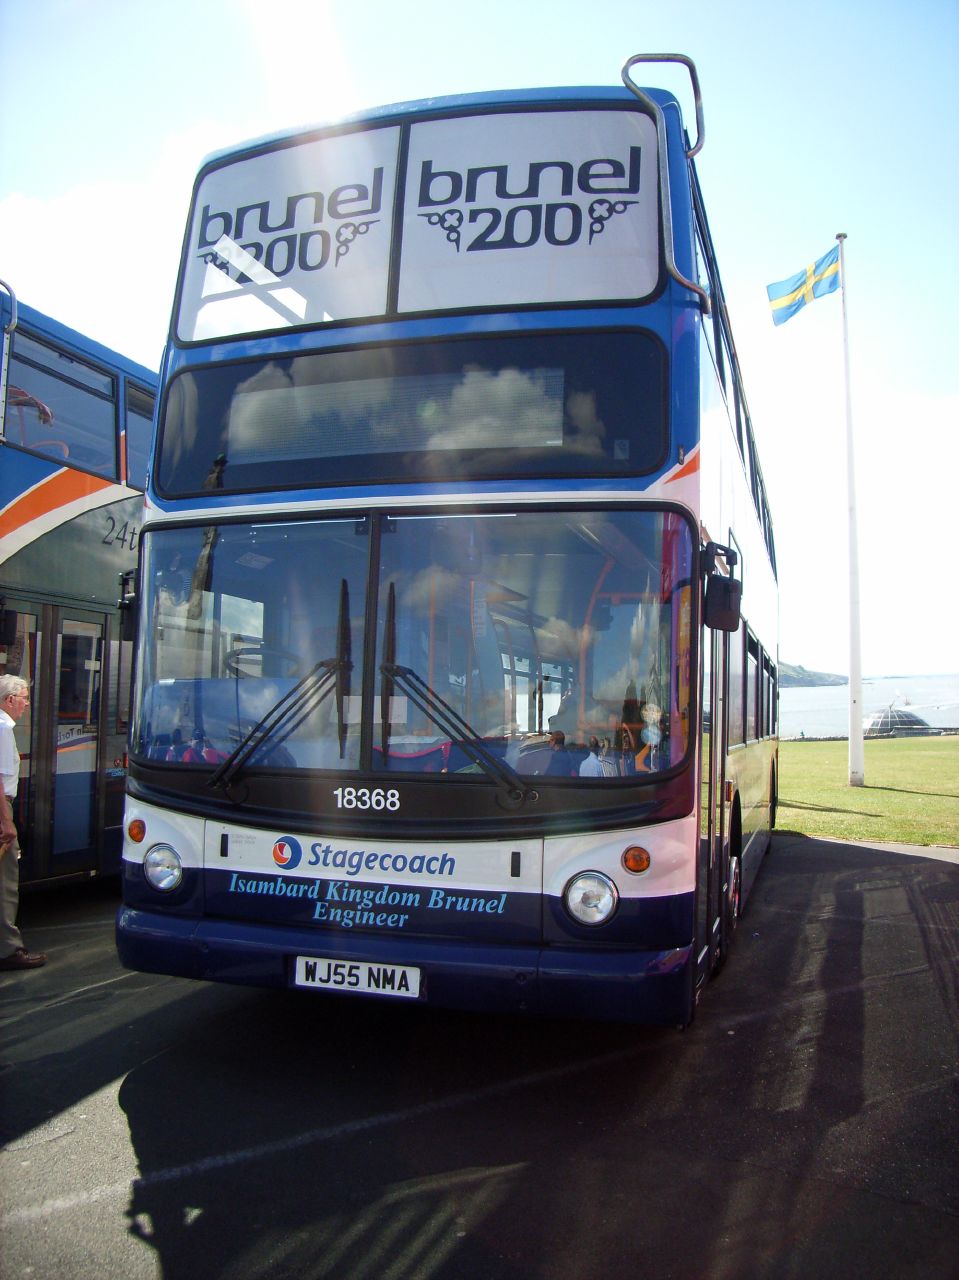 an orange white and blue double decker bus on street